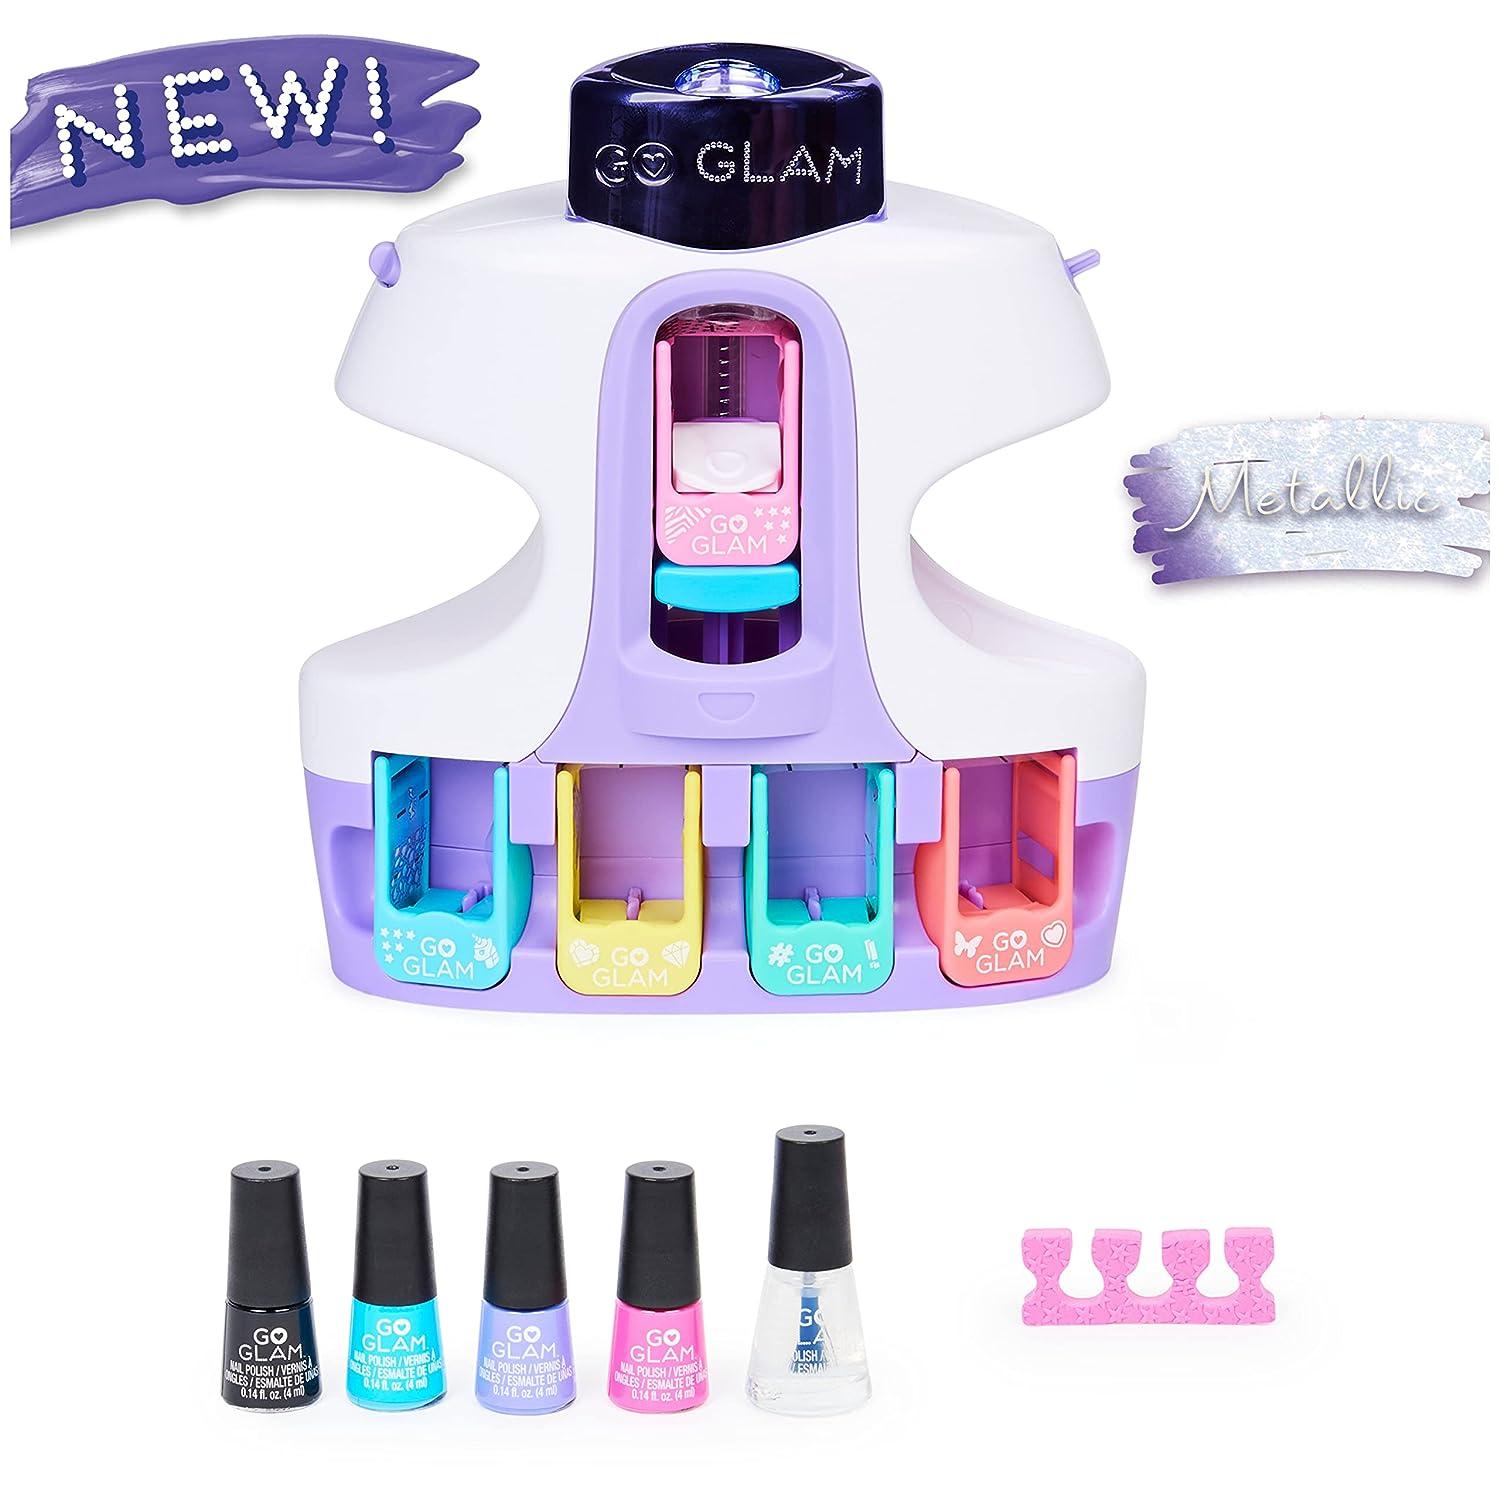 Cool Maker GO GLAM U-nique Metallic Nail Salon with 200 Icons and Designs 4  Polishes Stamper & Dryer Nail Kit for Girls  Exclusive Go Glam  U-nique Nail Salon